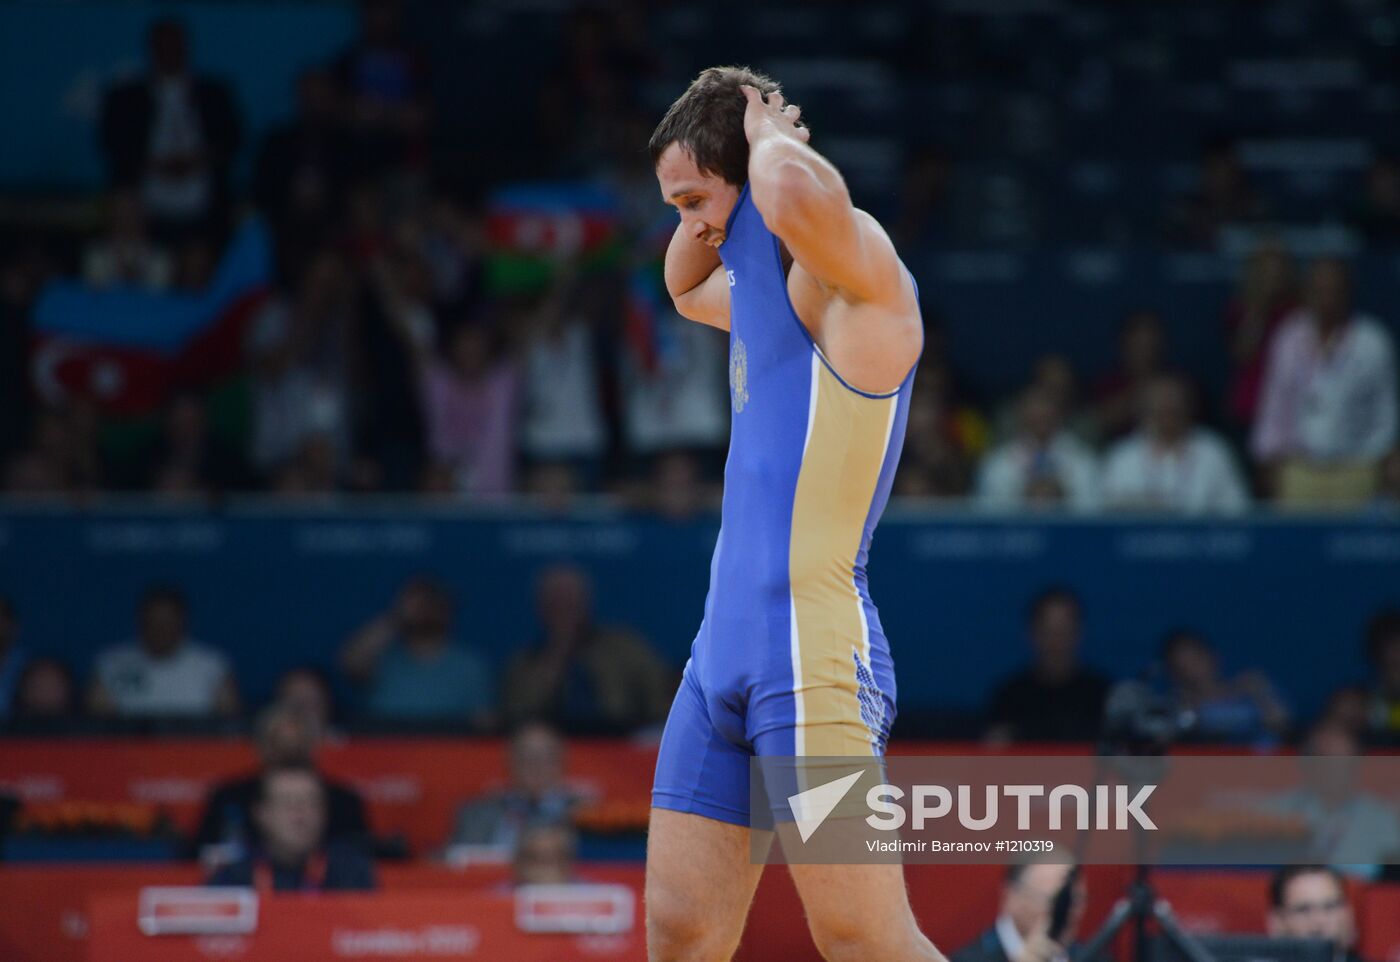 2012 Olympics. Men's freestyle wrestling. Day two